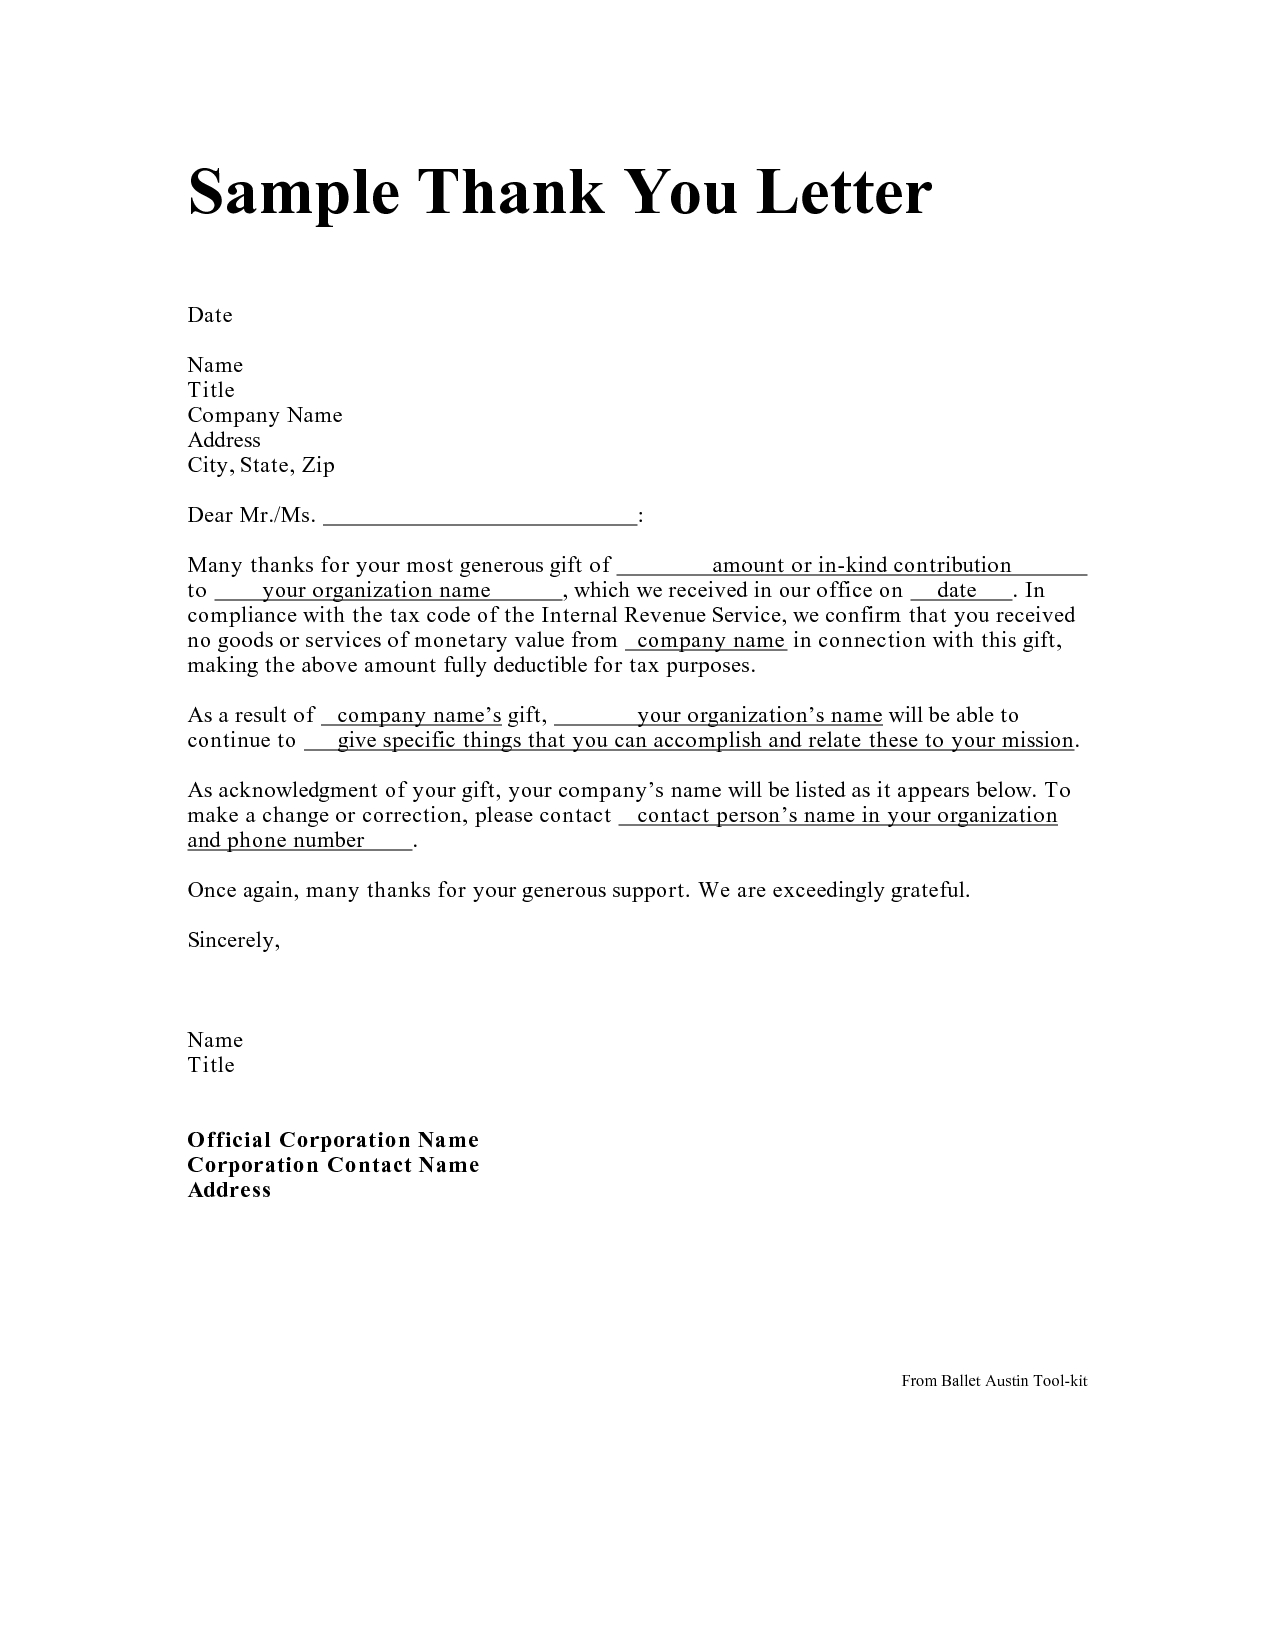 Mission Trip Letter Template - Personal Thank You Letter Personal Thank You Letter Samples